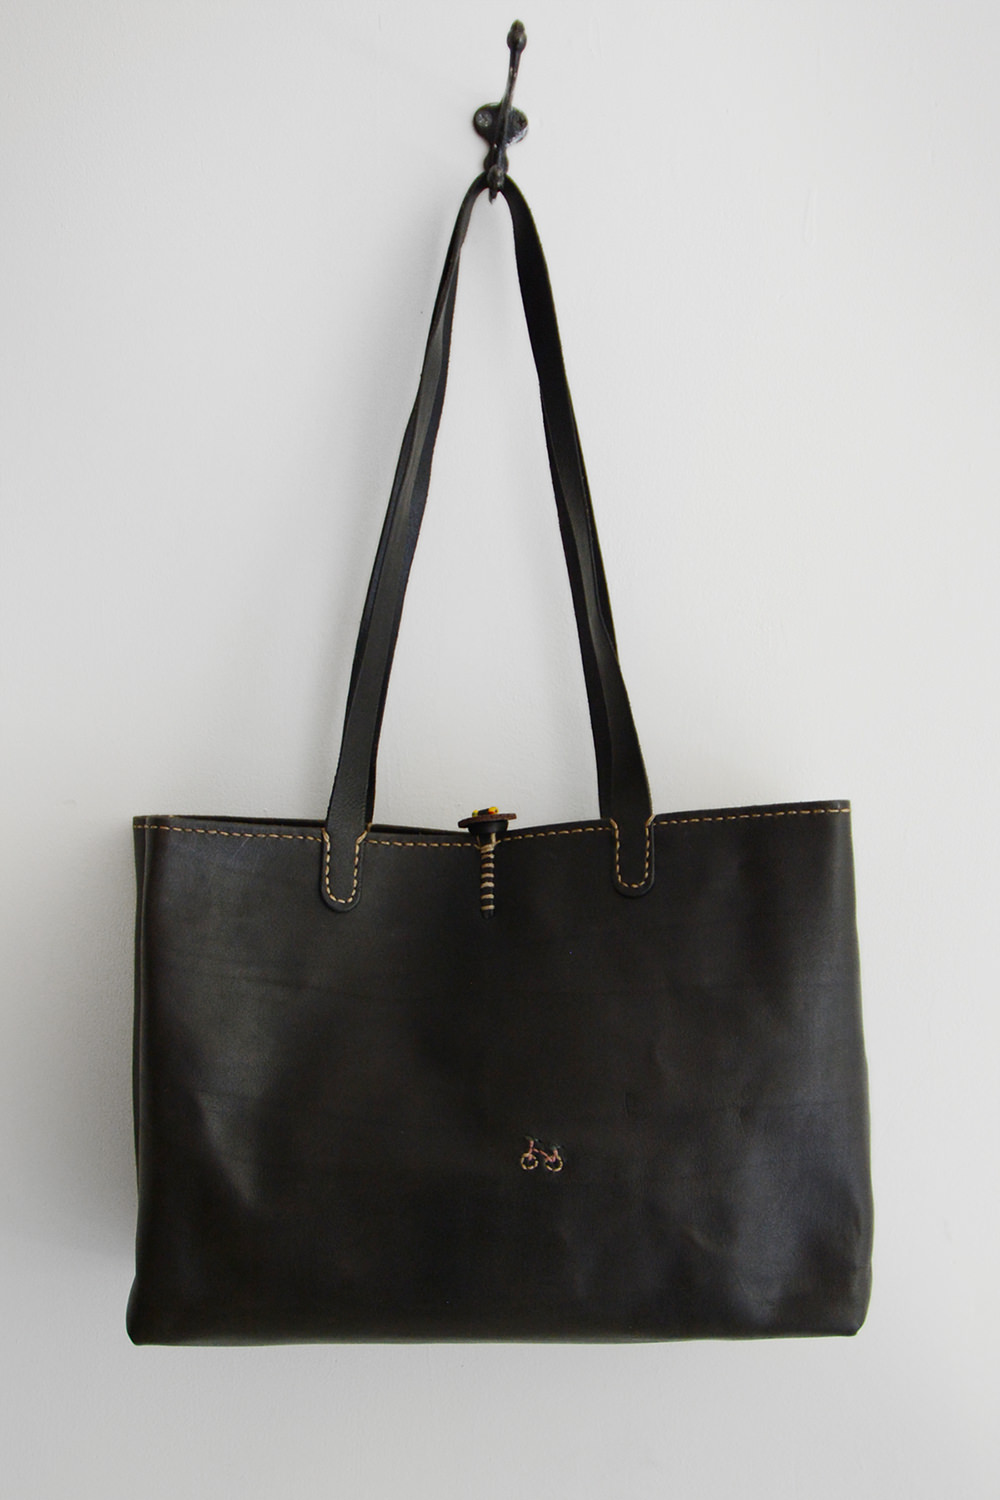 Henri、アンリ、leather goods、handcrafted leather、ハンドクラフト、made in Itary、ハンドメイド、手作り、handmade、トートバッグ、tote bag